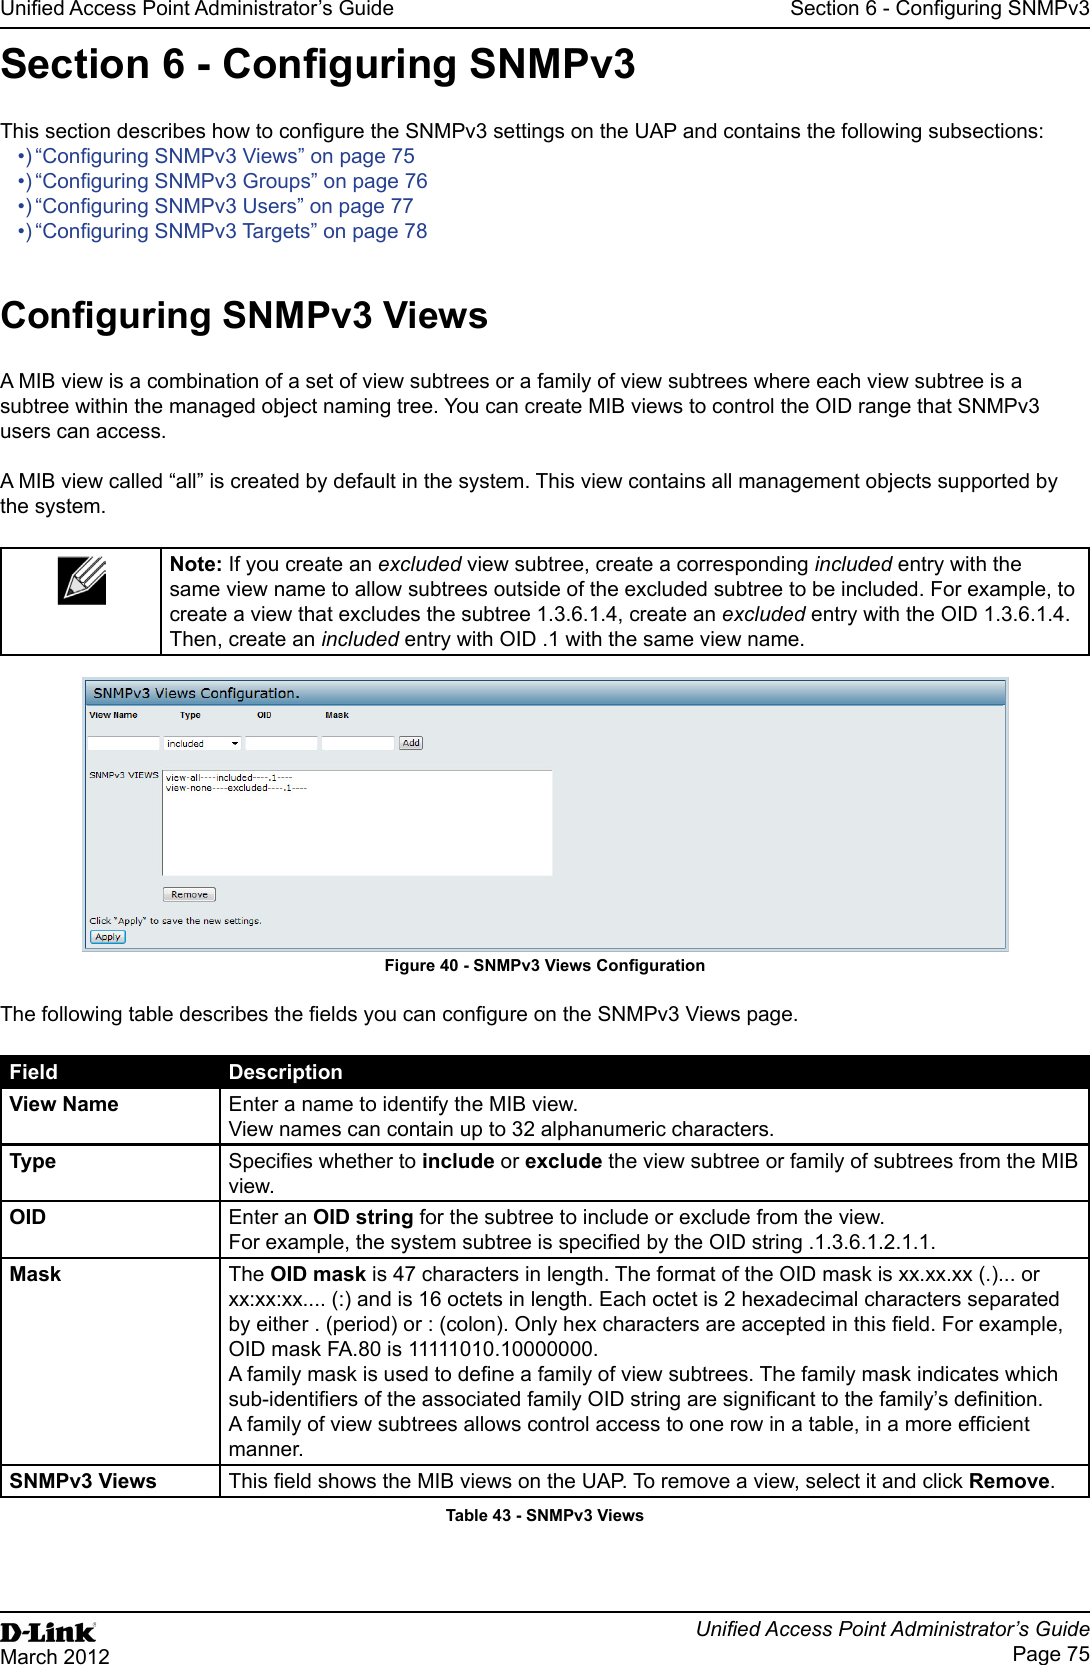 Unied Access Point Administrator’s GuideUnied Access Point Administrator’s GuidePage 75March 2012Section 6 - Conguring SNMPv3Section 6 - Conguring SNMPv3This section describes how to congure the SNMPv3 settings on the UAP and contains the following subsections:•) “Conguring SNMPv3 Views” on page 75•) “Conguring SNMPv3 Groups” on page 76•) “Conguring SNMPv3 Users” on page 77•) “Conguring SNMPv3 Targets” on page 78Conguring SNMPv3 ViewsA MIB view is a combination of a set of view subtrees or a family of view subtrees where each view subtree is a subtree within the managed object naming tree. You can create MIB views to control the OID range that SNMPv3 users can access.A MIB view called “all” is created by default in the system. This view contains all management objects supported by the system.Note: If you create an excluded view subtree, create a corresponding included entry with the same view name to allow subtrees outside of the excluded subtree to be included. For example, to create a view that excludes the subtree 1.3.6.1.4, create an excluded entry with the OID 1.3.6.1.4. Then, create an included entry with OID .1 with the same view name. Figure 40 - SNMPv3 Views CongurationThe following table describes the elds you can congure on the SNMPv3 Views page.Field DescriptionView Name Enter a name to identify the MIB view. View names can contain up to 32 alphanumeric characters.Type Species whether to include or exclude the view subtree or family of subtrees from the MIB view.OID Enter an OID string for the subtree to include or exclude from the view. For example, the system subtree is specied by the OID string .1.3.6.1.2.1.1.Mask The OID mask is 47 characters in length. The format of the OID mask is xx.xx.xx (.)... or xx:xx:xx.... (:) and is 16 octets in length. Each octet is 2 hexadecimal characters separated by either . (period) or : (colon). Only hex characters are accepted in this eld. For example, OID mask FA.80 is 11111010.10000000.A family mask is used to dene a family of view subtrees. The family mask indicates which sub-identiers of the associated family OID string are signicant to the family’s denition. A family of view subtrees allows control access to one row in a table, in a more efcient manner.SNMPv3 Views This eld shows the MIB views on the UAP. To remove a view, select it and click Remove.Table 43 - SNMPv3 Views